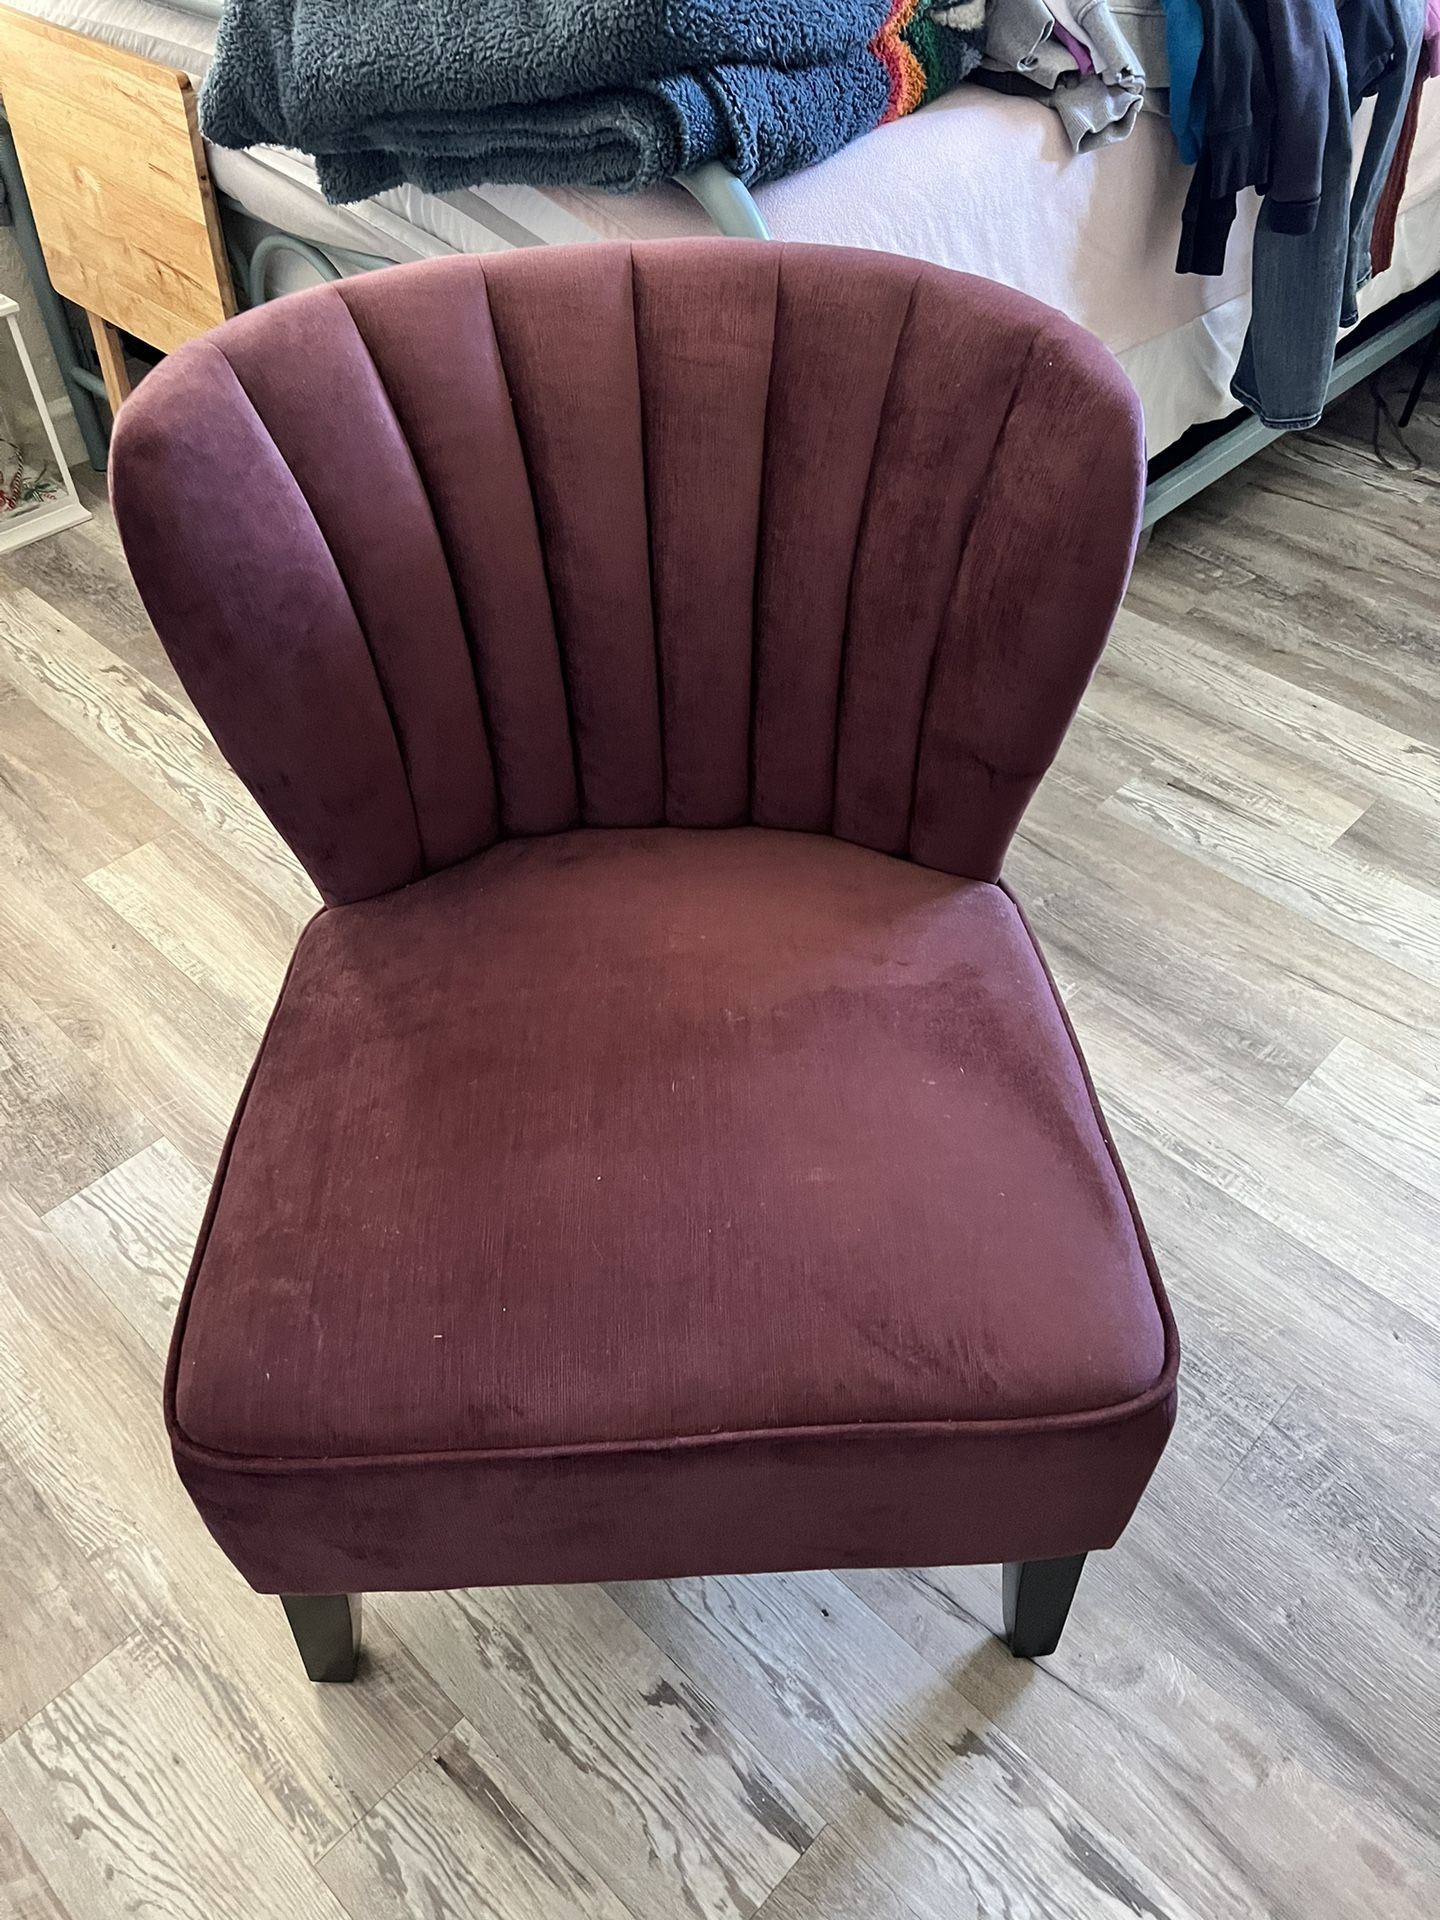 Lightly Used, New Condition, Pier One Royal Purple Wingback Chair